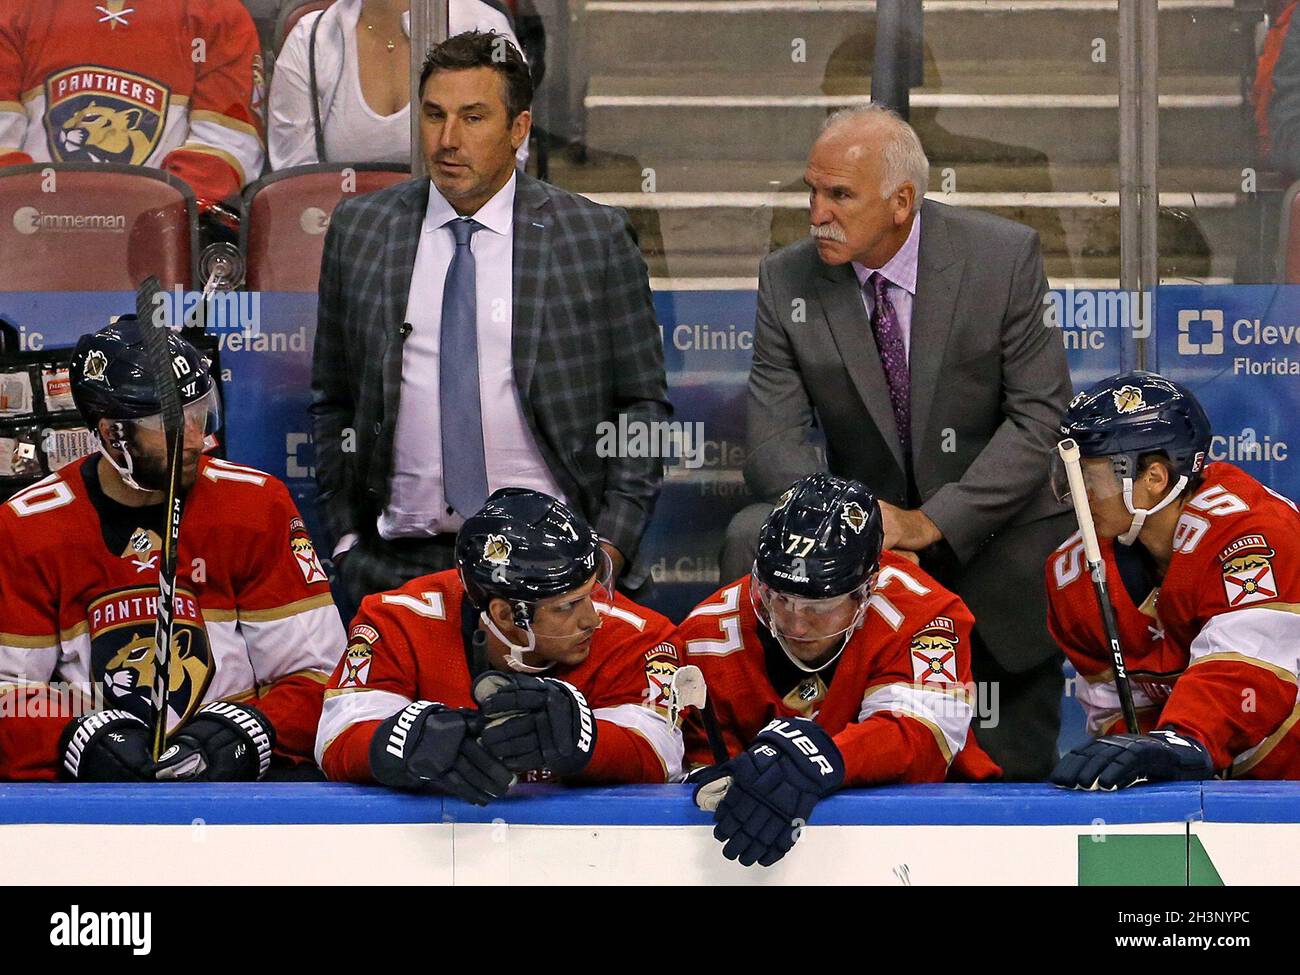 On Oct. 8, 2019, Florida Panthers head coach Joel Quenneville, top right, and assistant coach Andrew Brunette look from the bench during a game against the Carolina Hurricanes at the BB&T Center in Sunrise, Florida. (Photo by David Santiago/Miami Herald/TNS/Sipa USA) Stock Photo